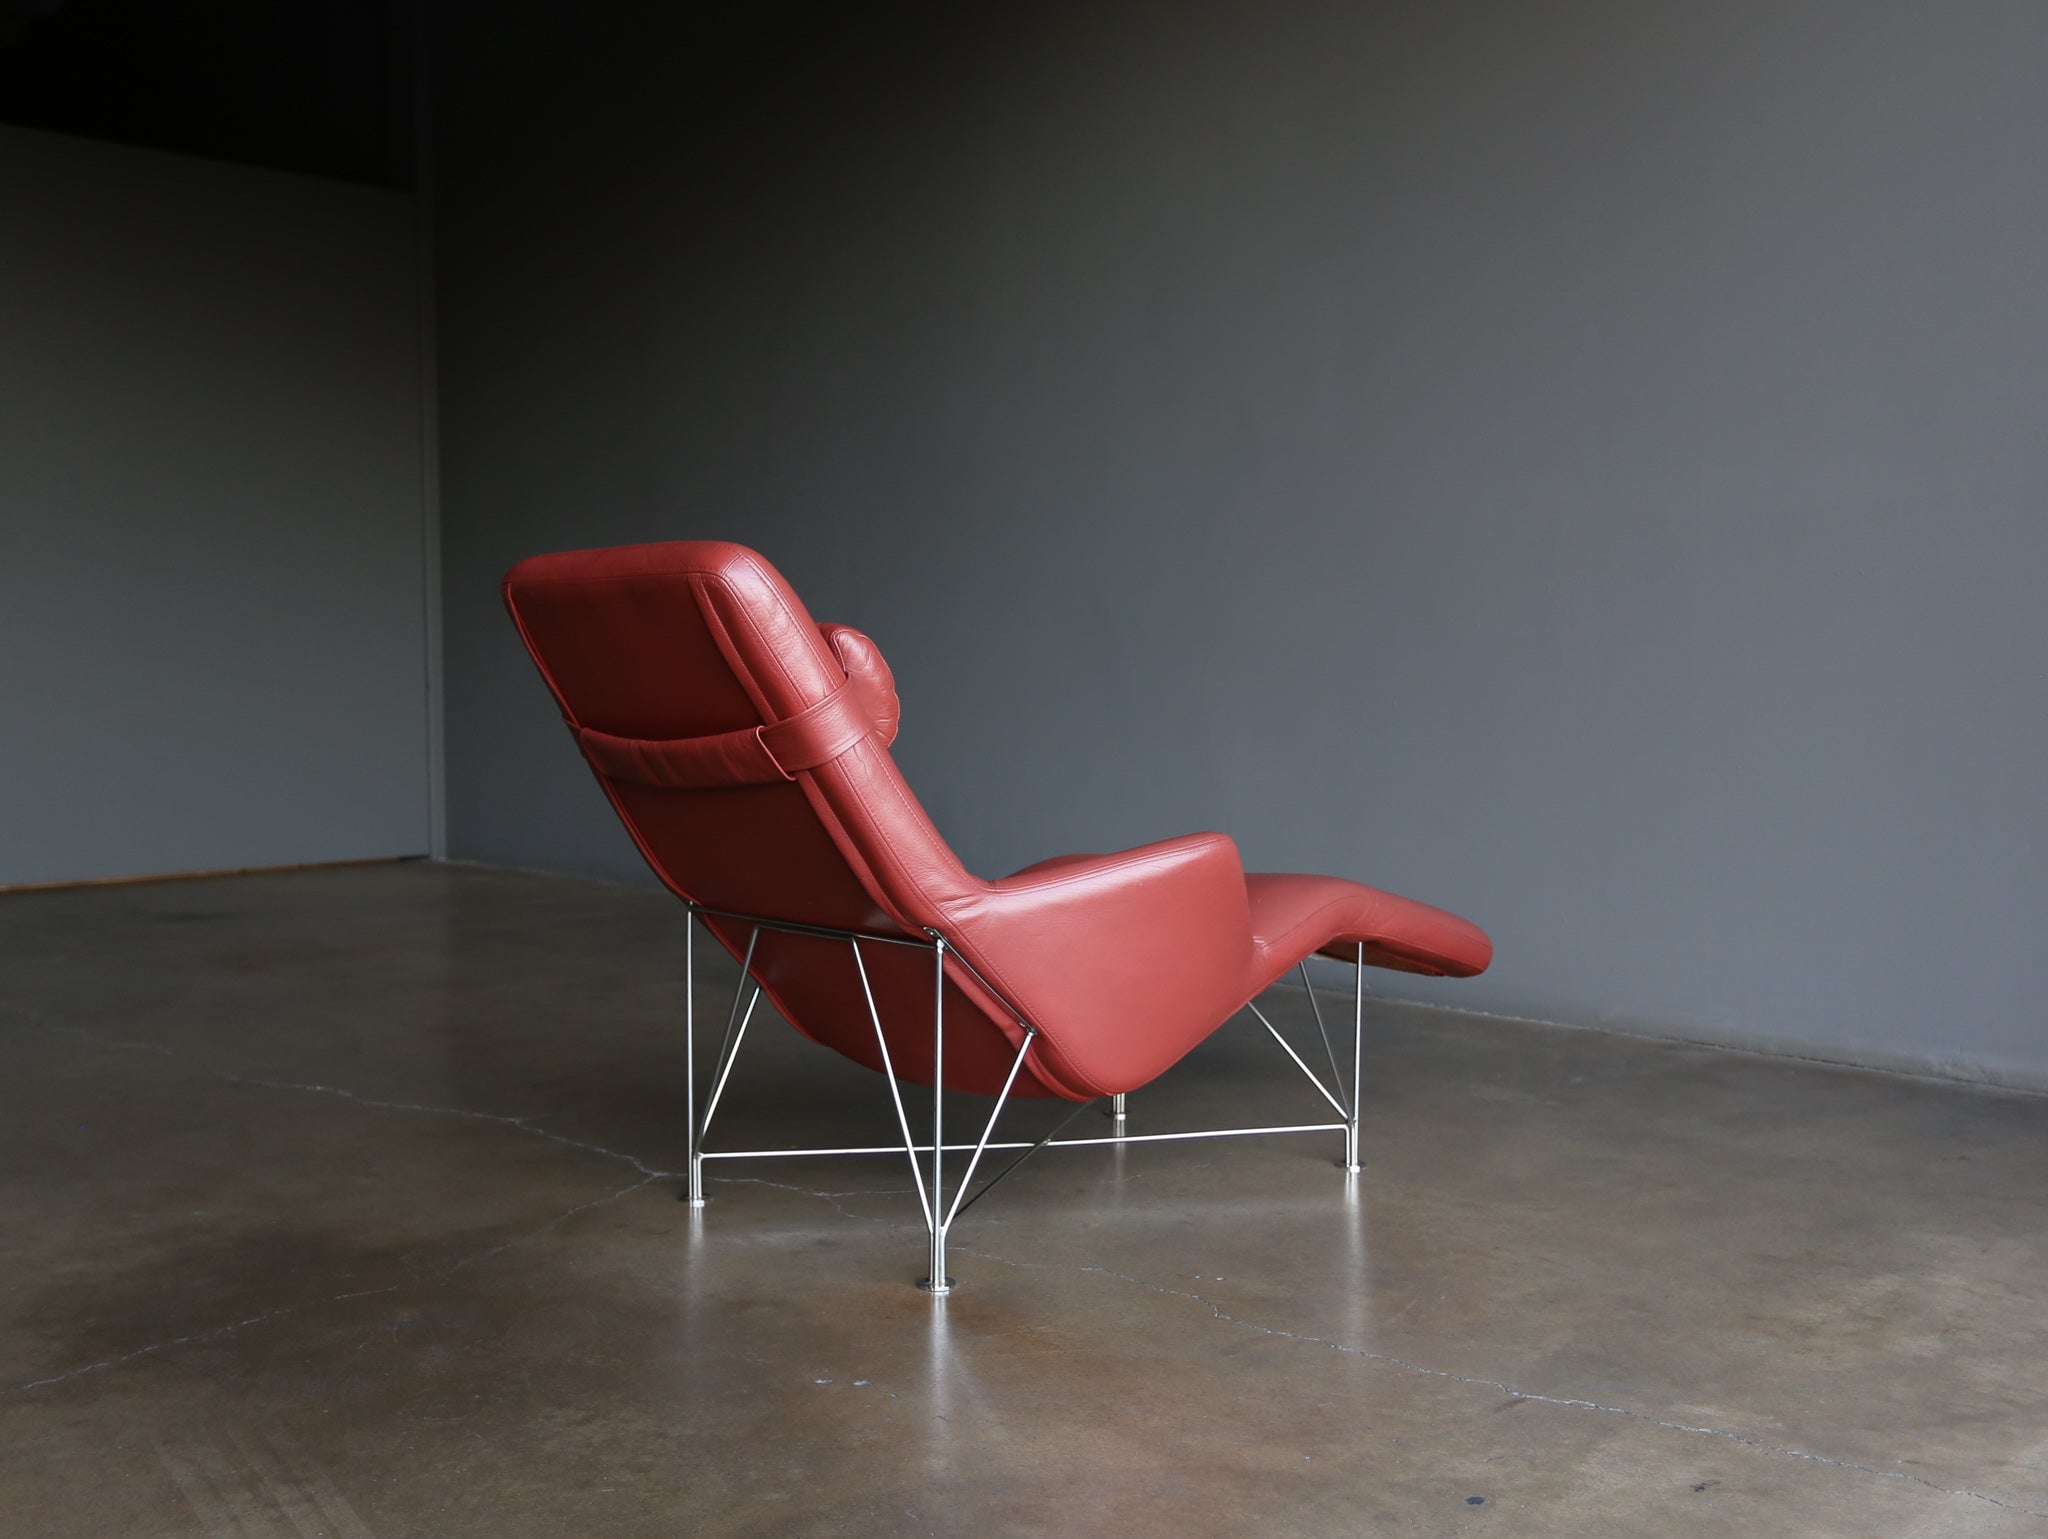 = SOLD = Kenneth Bergenblad Superspider Leather Lounge Chair for DUX, circa 1987